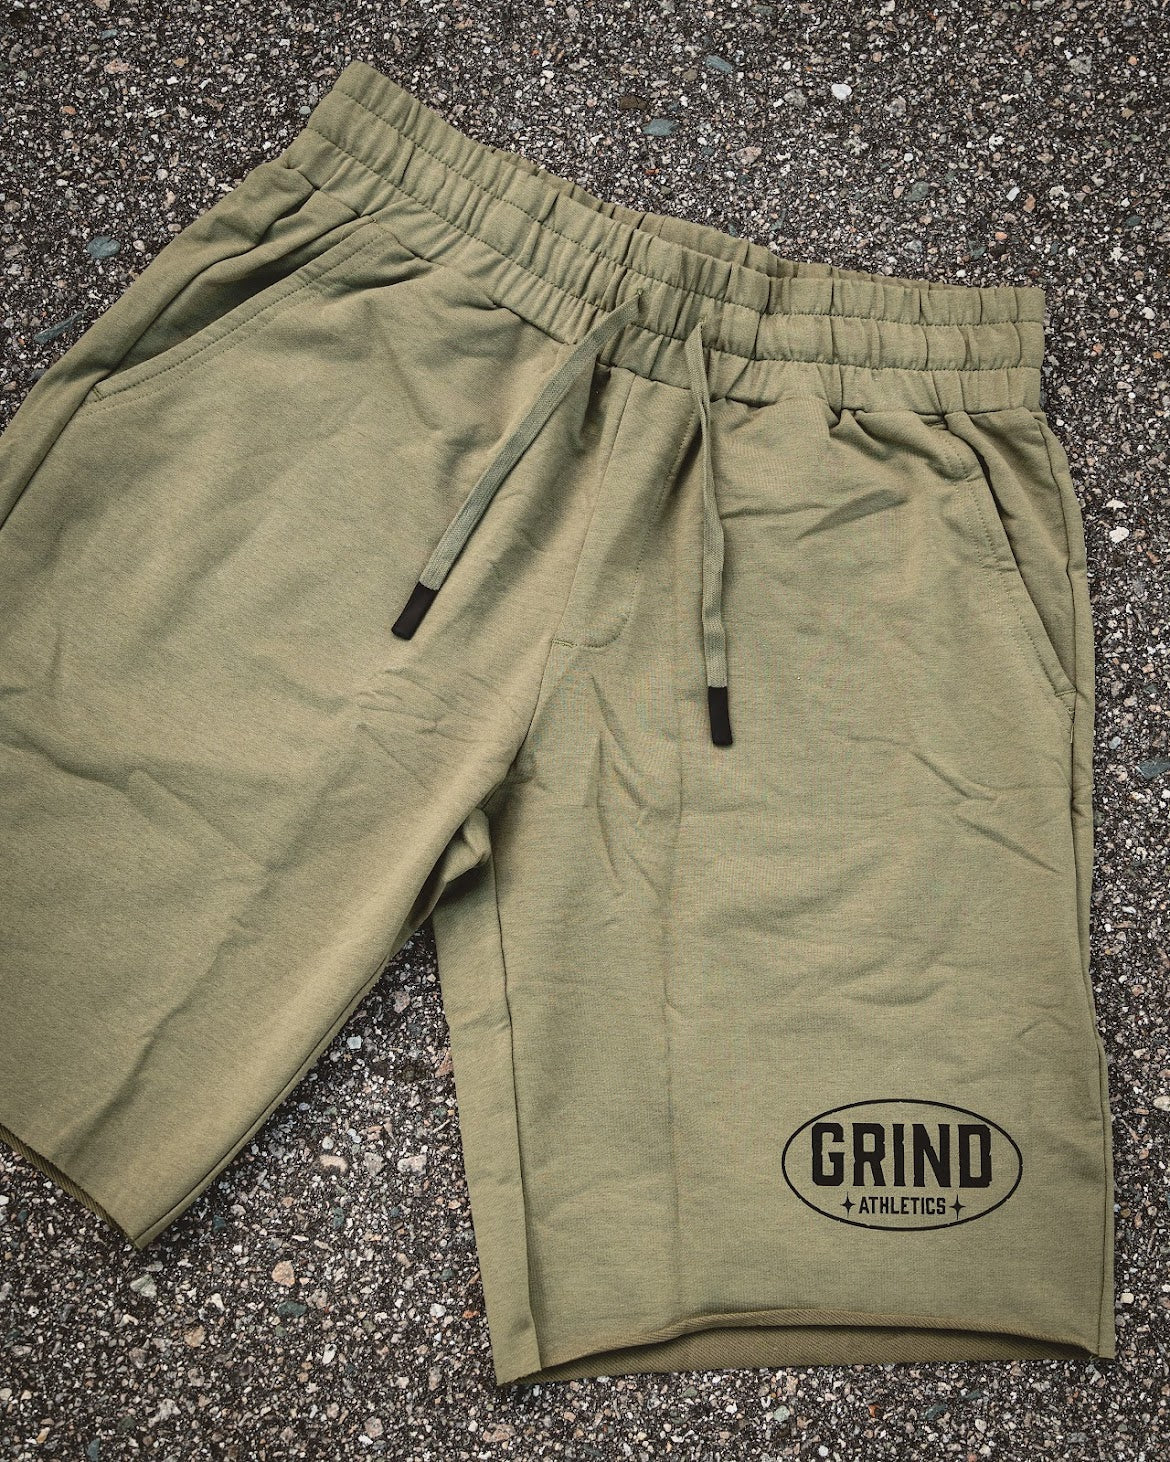 Classic Grind Logo Oval OD - - Green Shorts